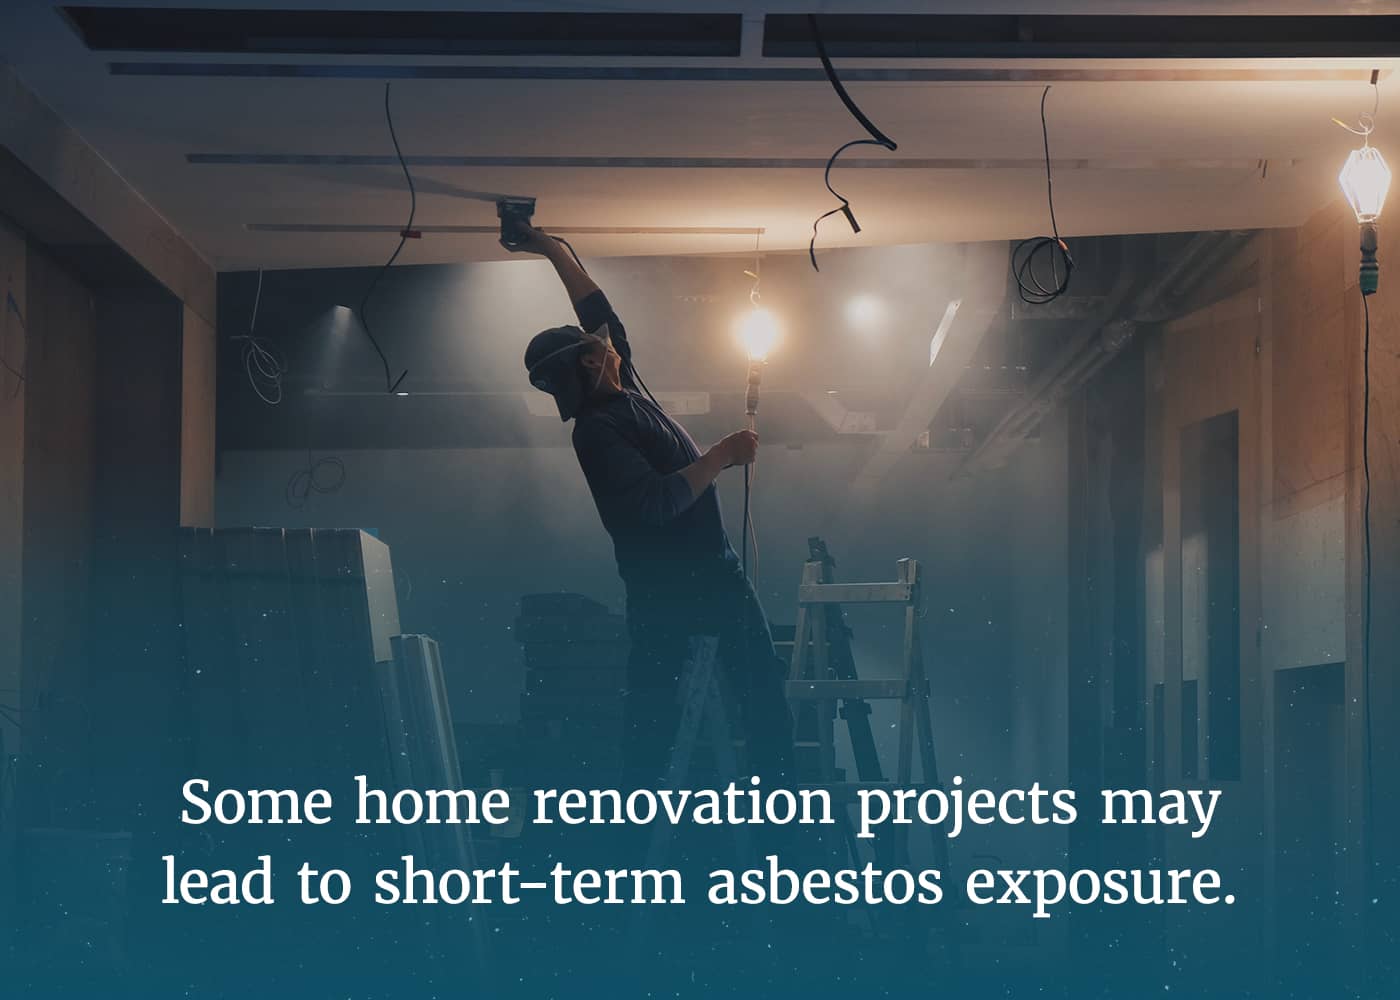 Some home renovation projects can lead to short-term asbestos exposure.